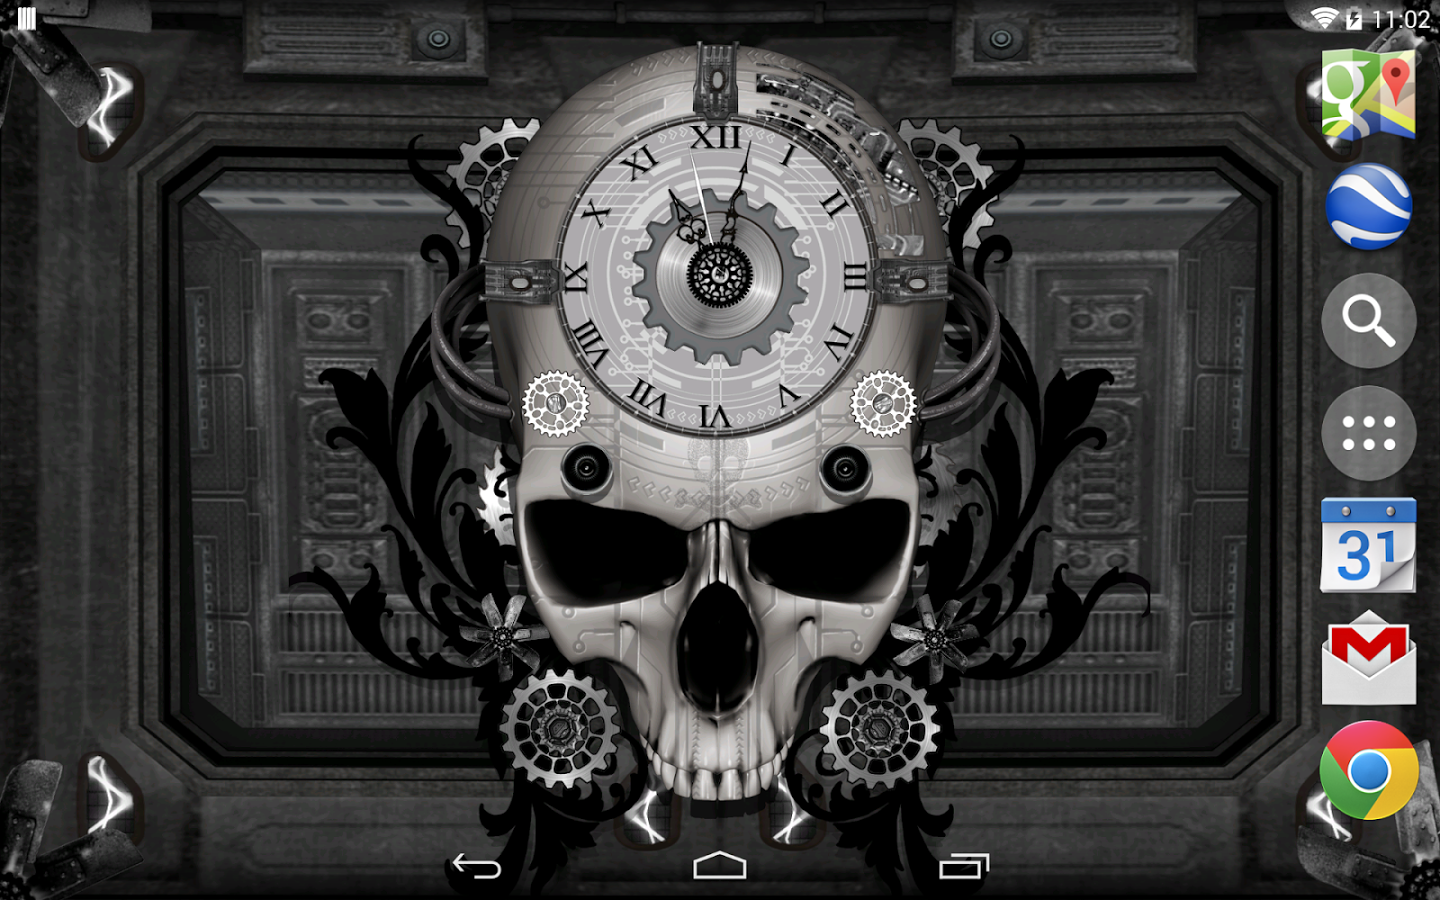 Steampunk Clock Live Wallpaper   Android Apps on Google Play 1440x900